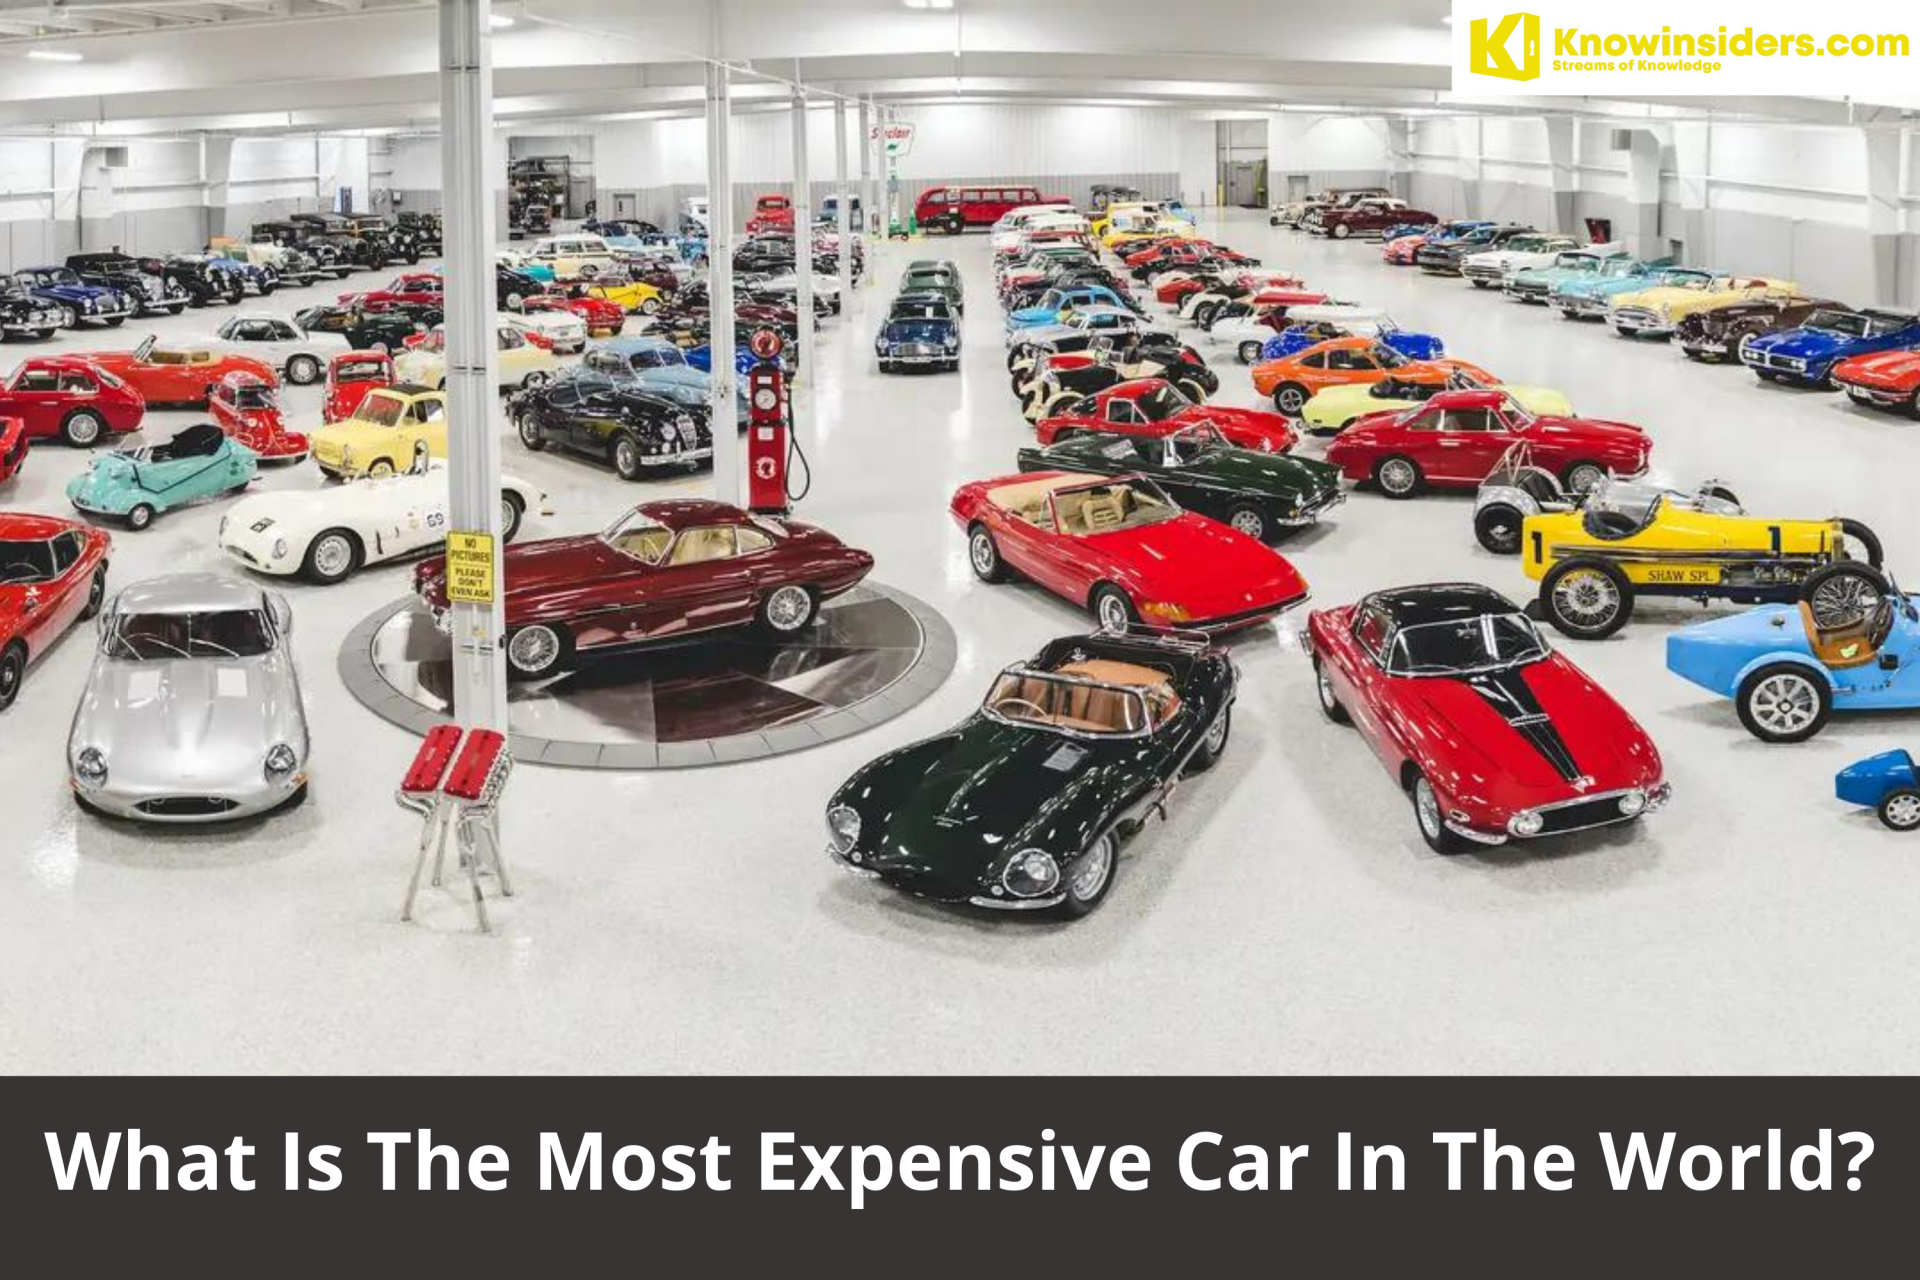 What Is The Most Expensive Car In The World?